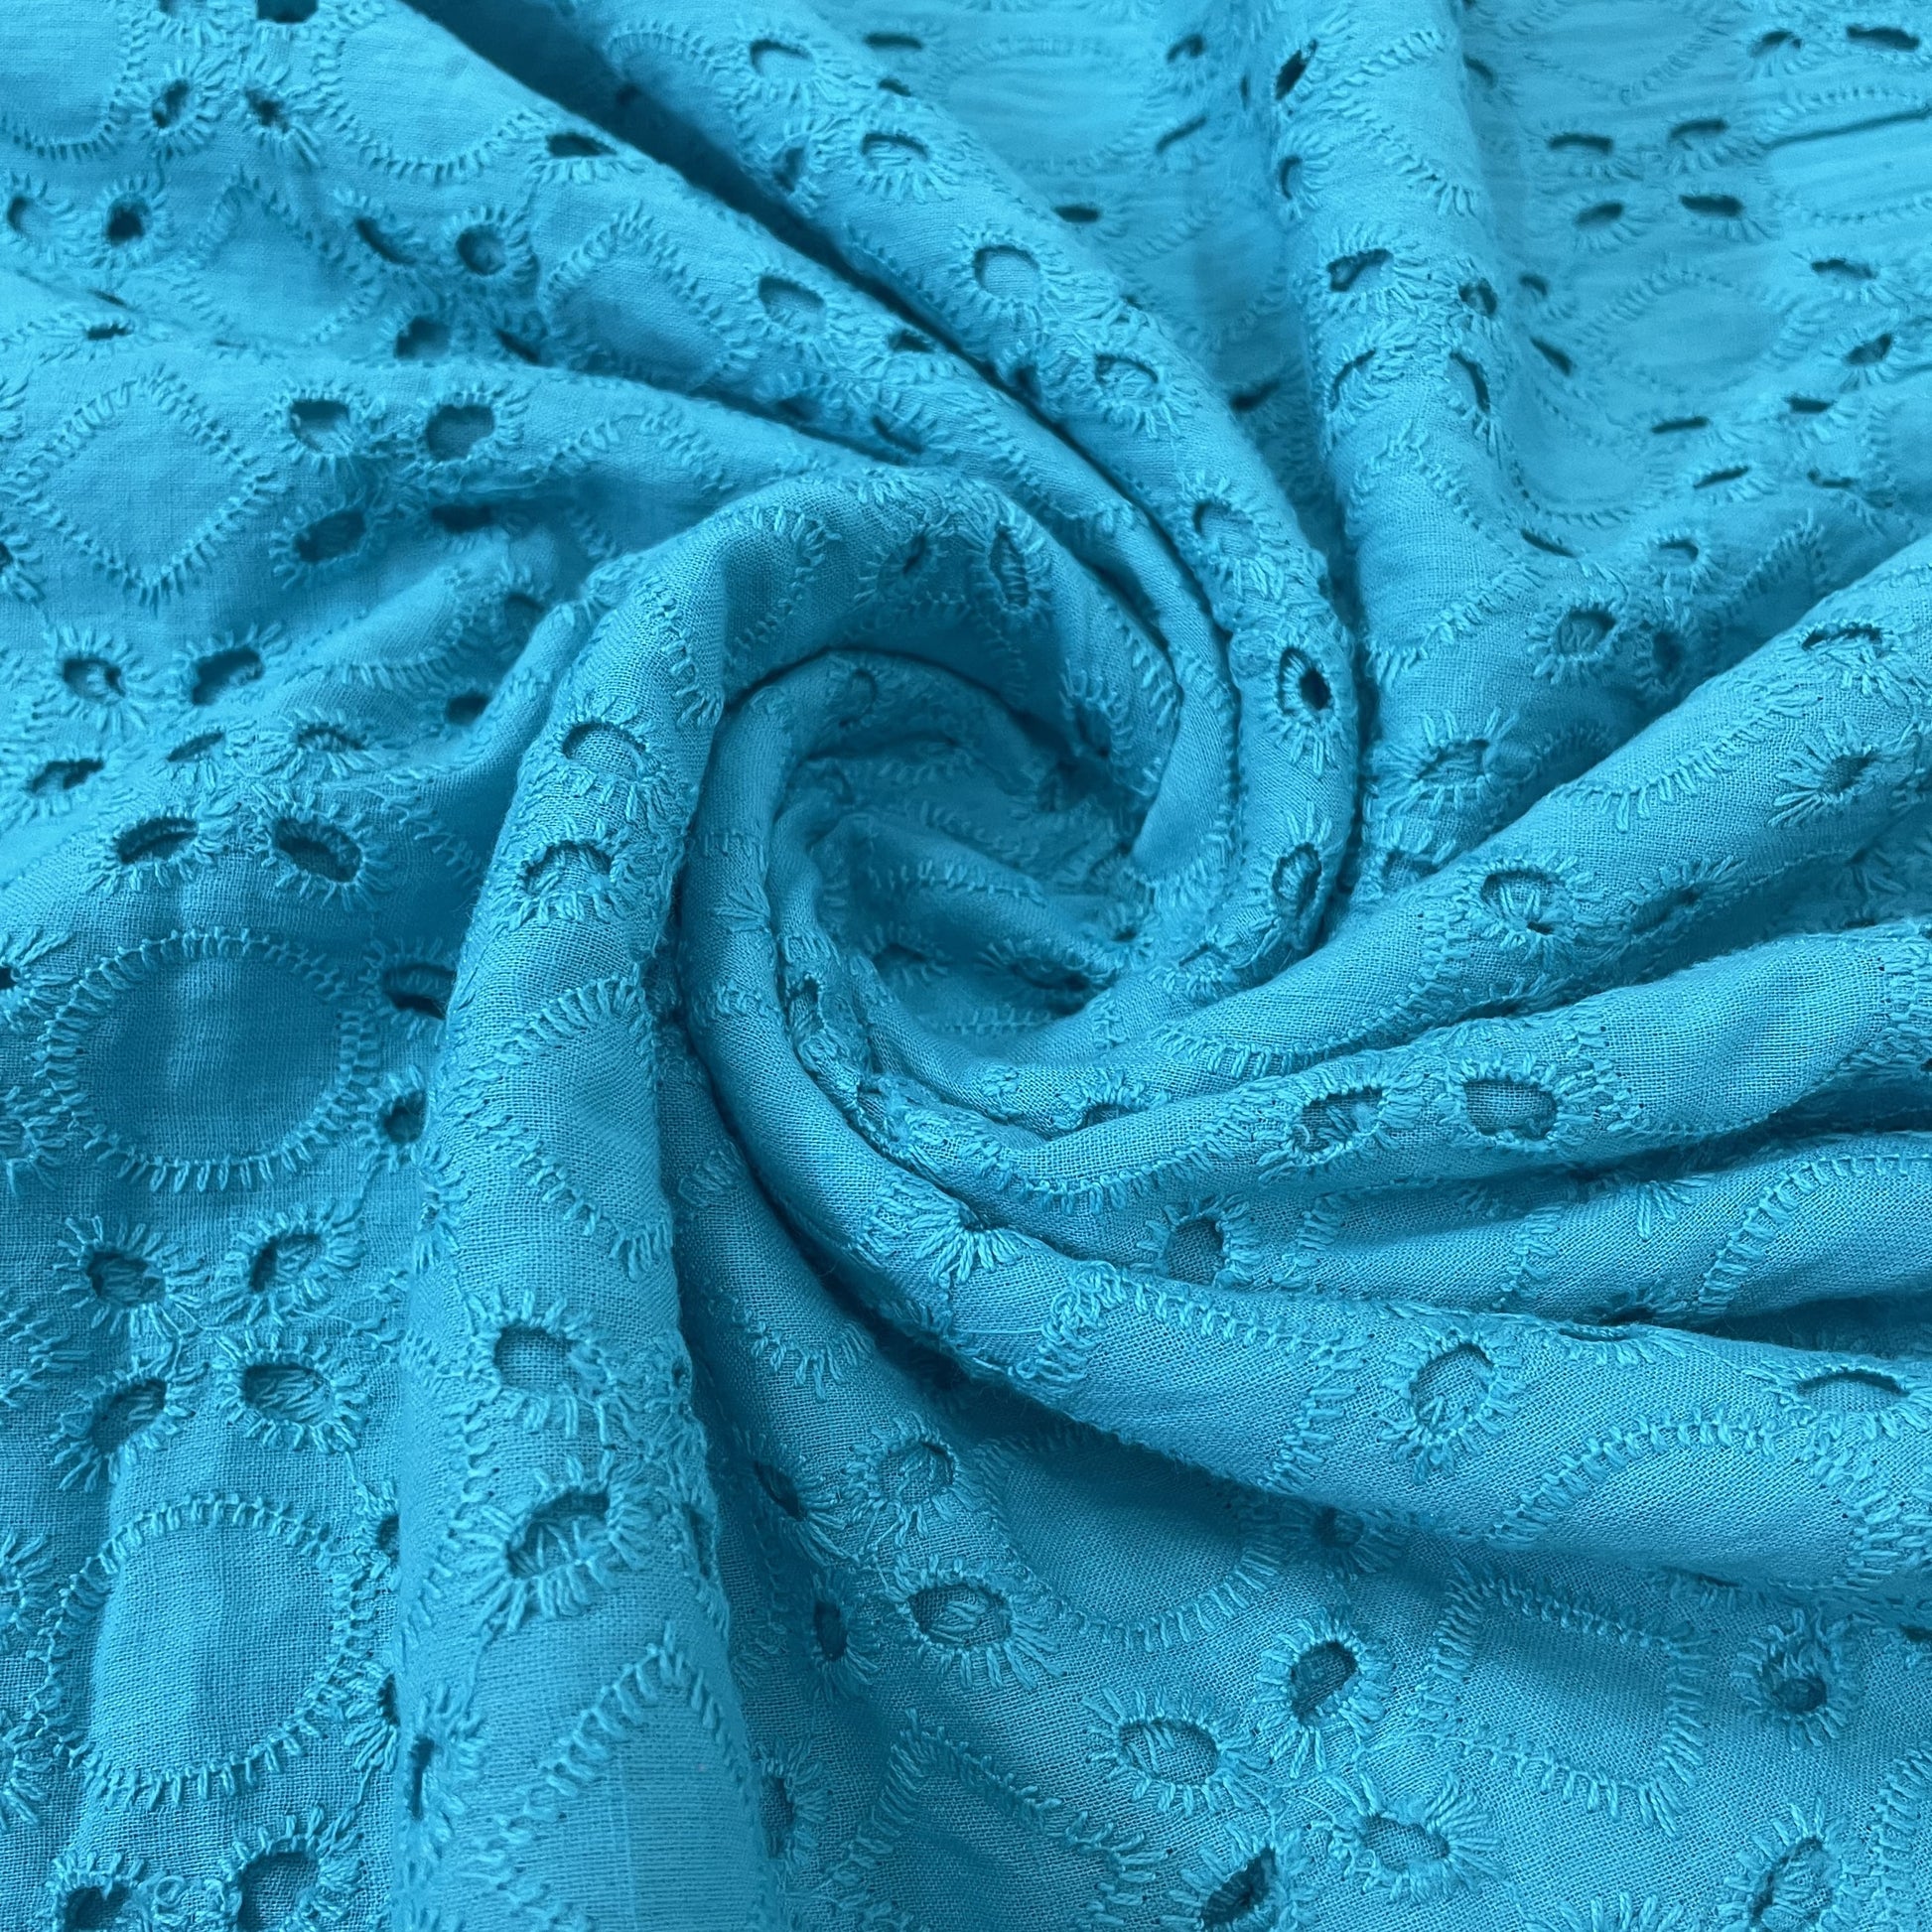 Classic Turquoise Blue Floral Embroidery Cotton Schiffli Fabric